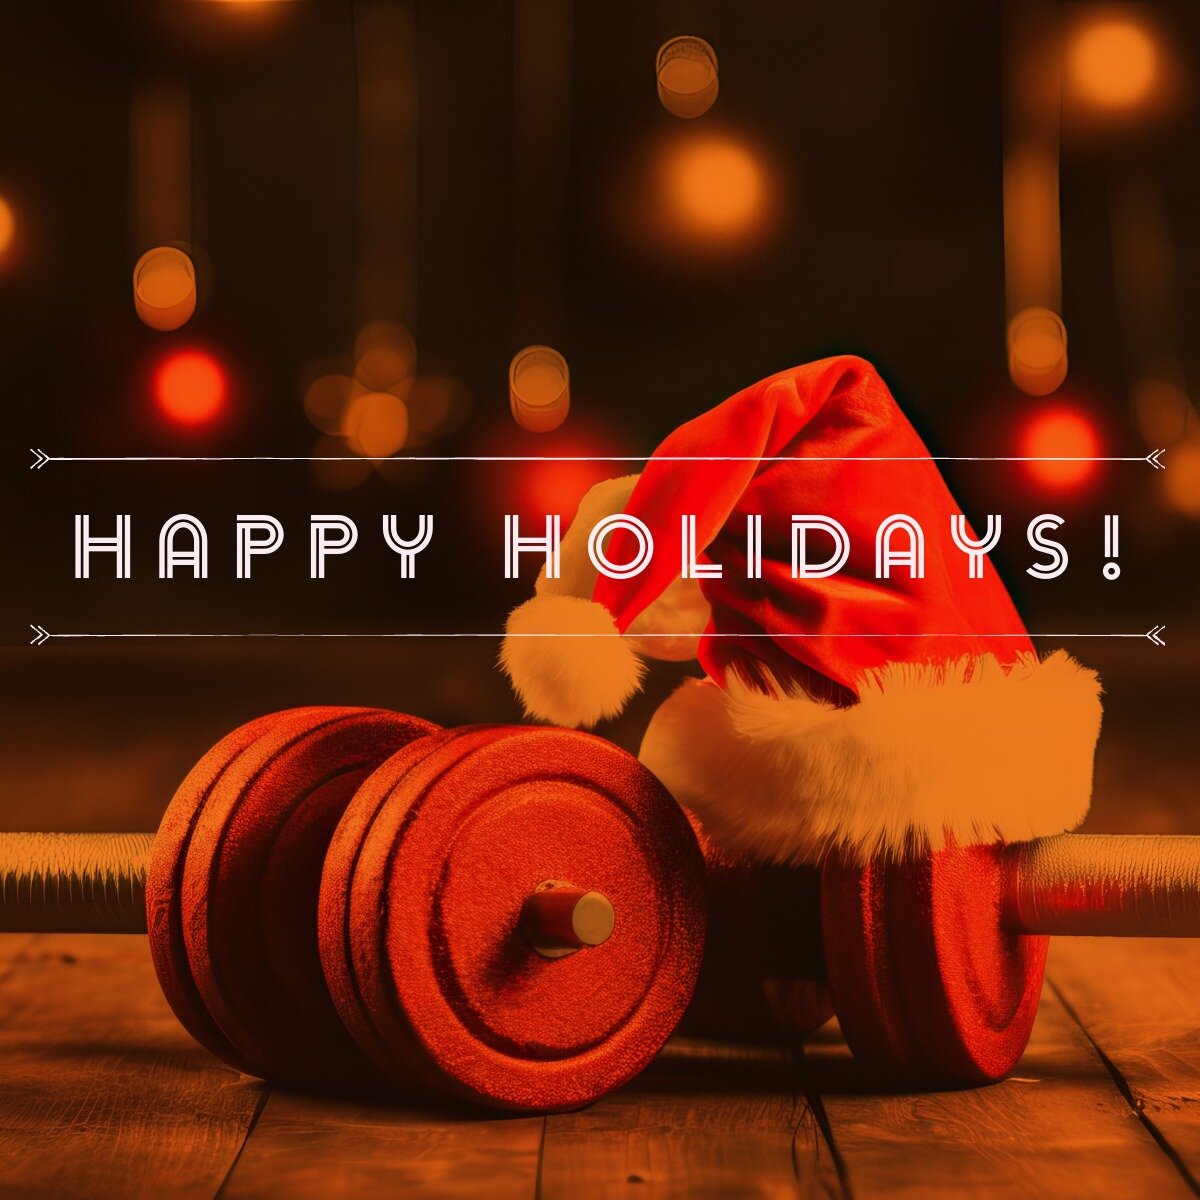 🎉 Wishing everyone a season filled with joy, warmth, and festivities! 🌟 May this holiday time bring you moments of peace, laughter, and good health. Happy holidays to each and every one of you! 🎁💪 

#HappyHolidays #EnvisionFitness #move4life #mem